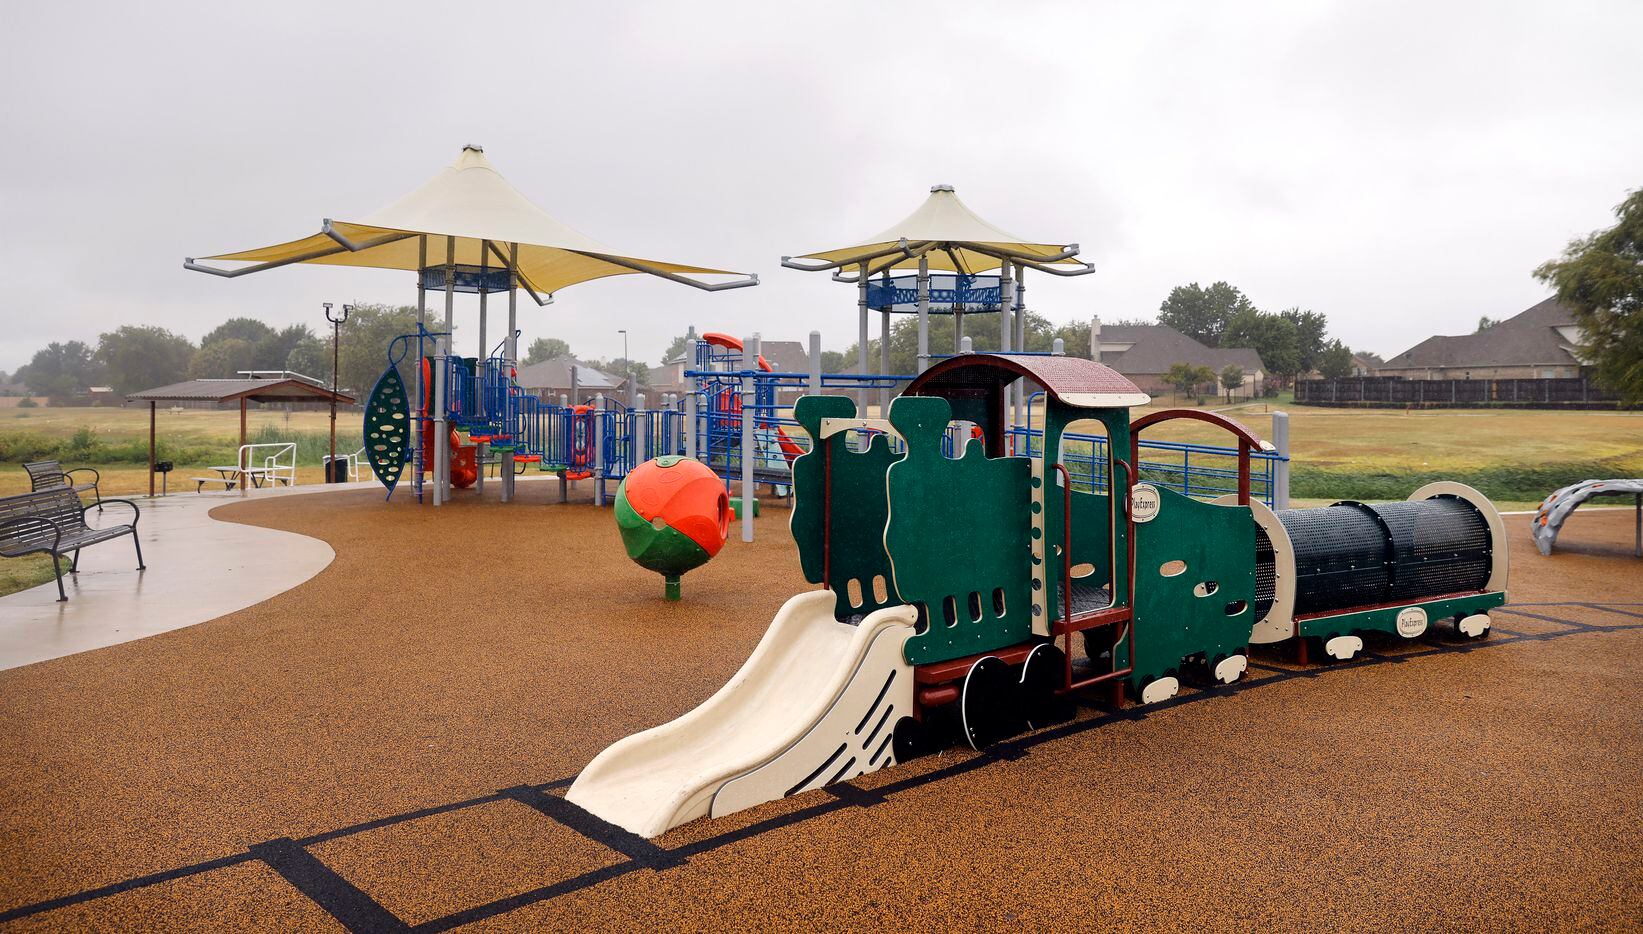 Children’s play equipment is modeled after a train in the Willow Creek Station park in Saginaw.